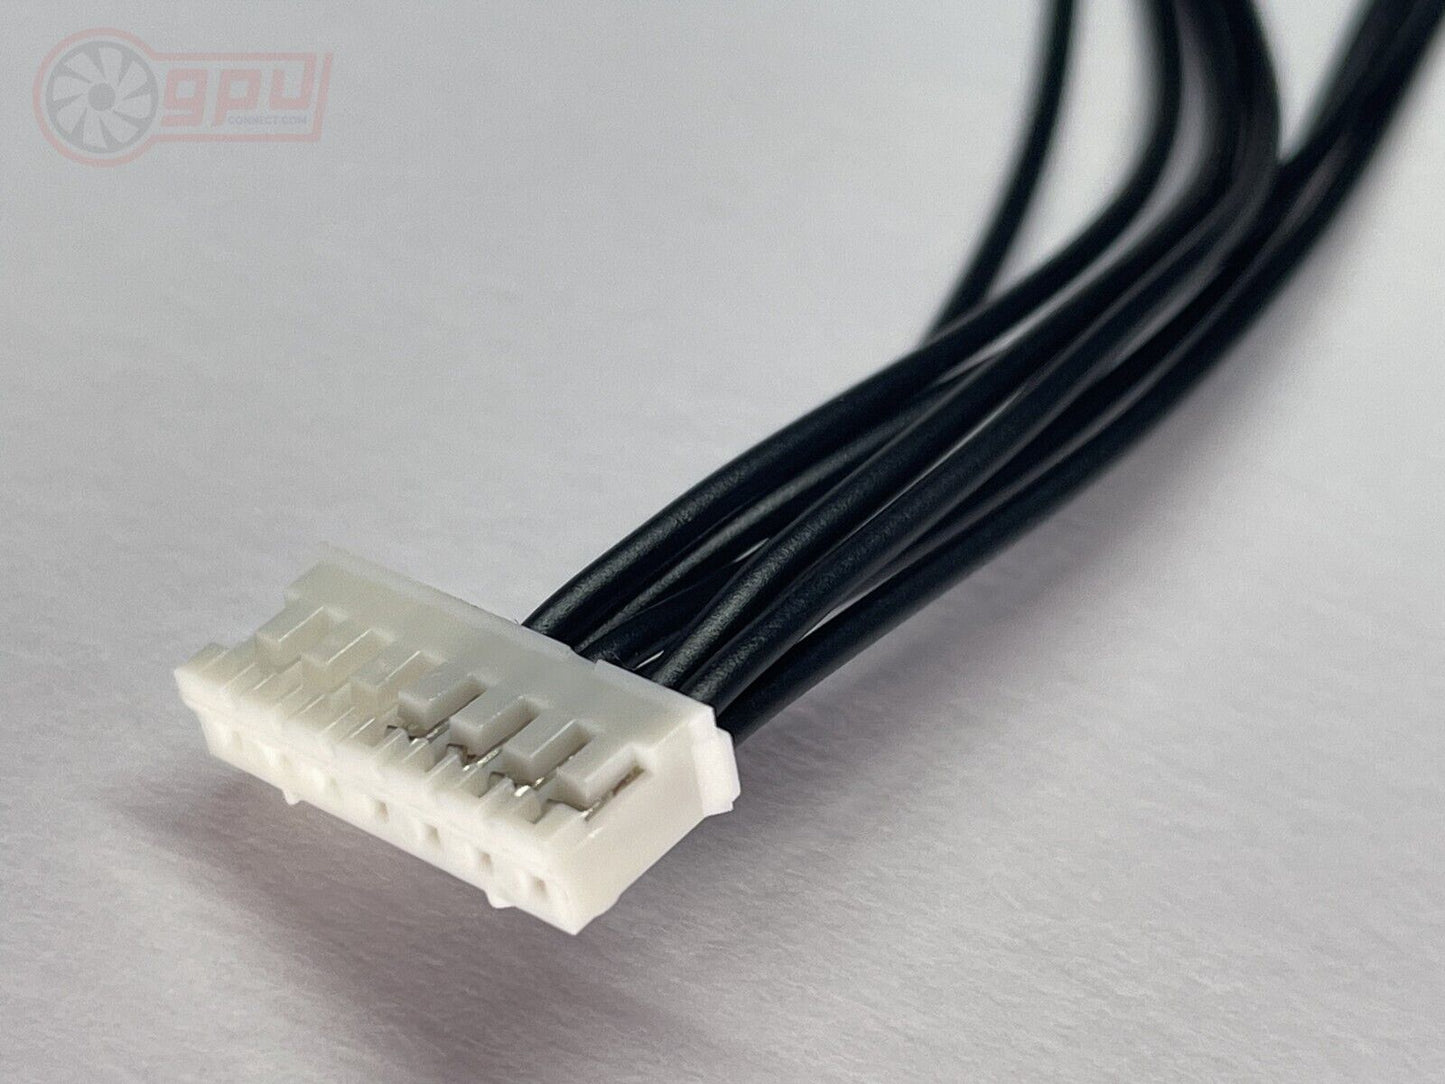 AMD Radeon 7900 XTX 7-Pin to Standard Dual 4-Pin PWM Fan Adapter Cable for GPUs - GPUCONNECT.COM